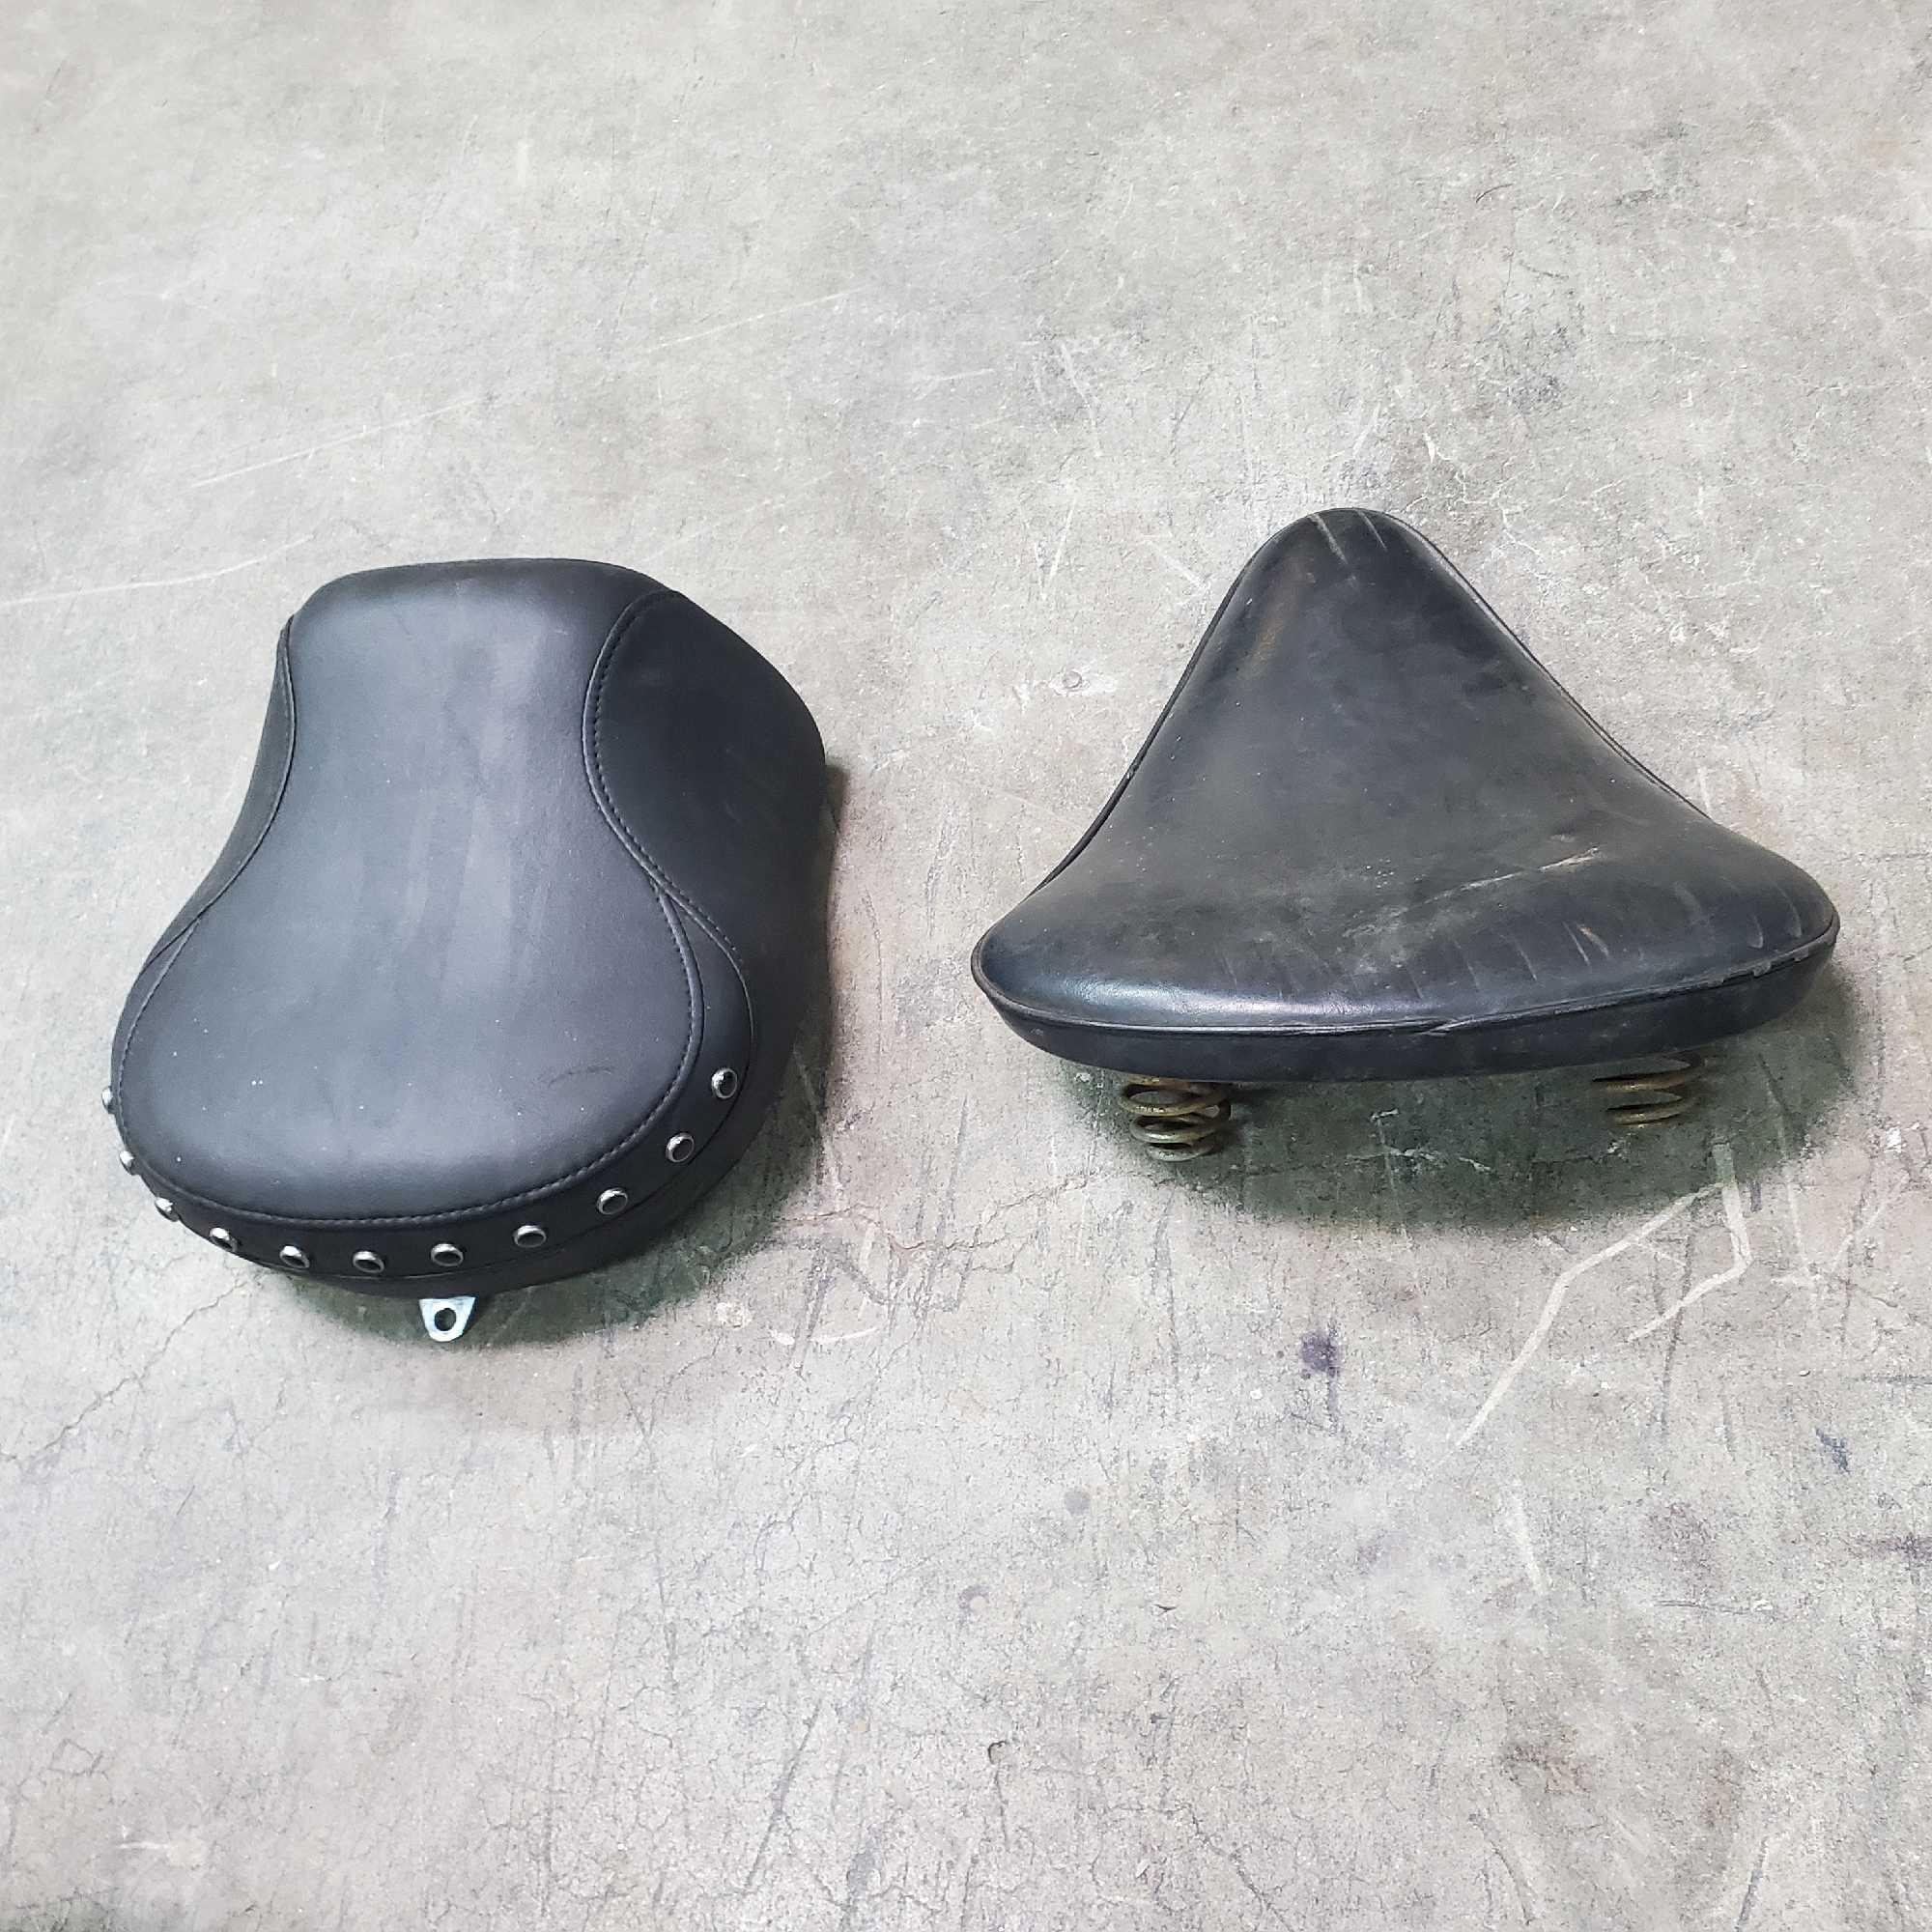 5 Harley Davidson motorcycle seats 1 backrest all black leather 6 pieces total